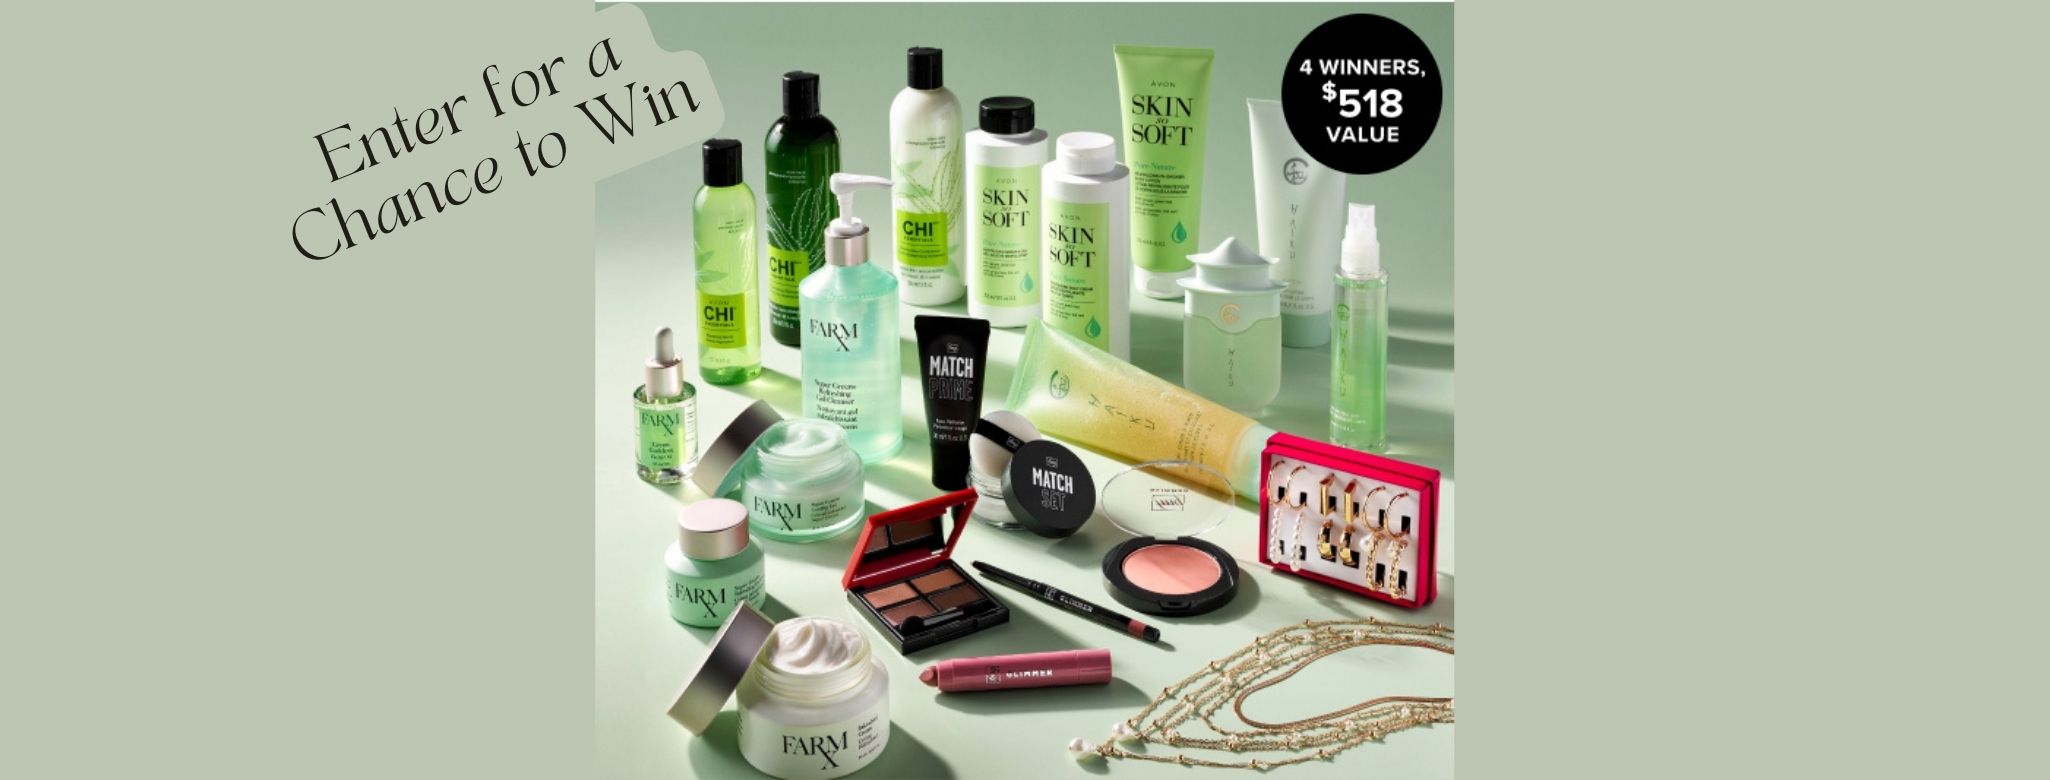 Spring Beauty Refresh Sweepstakes